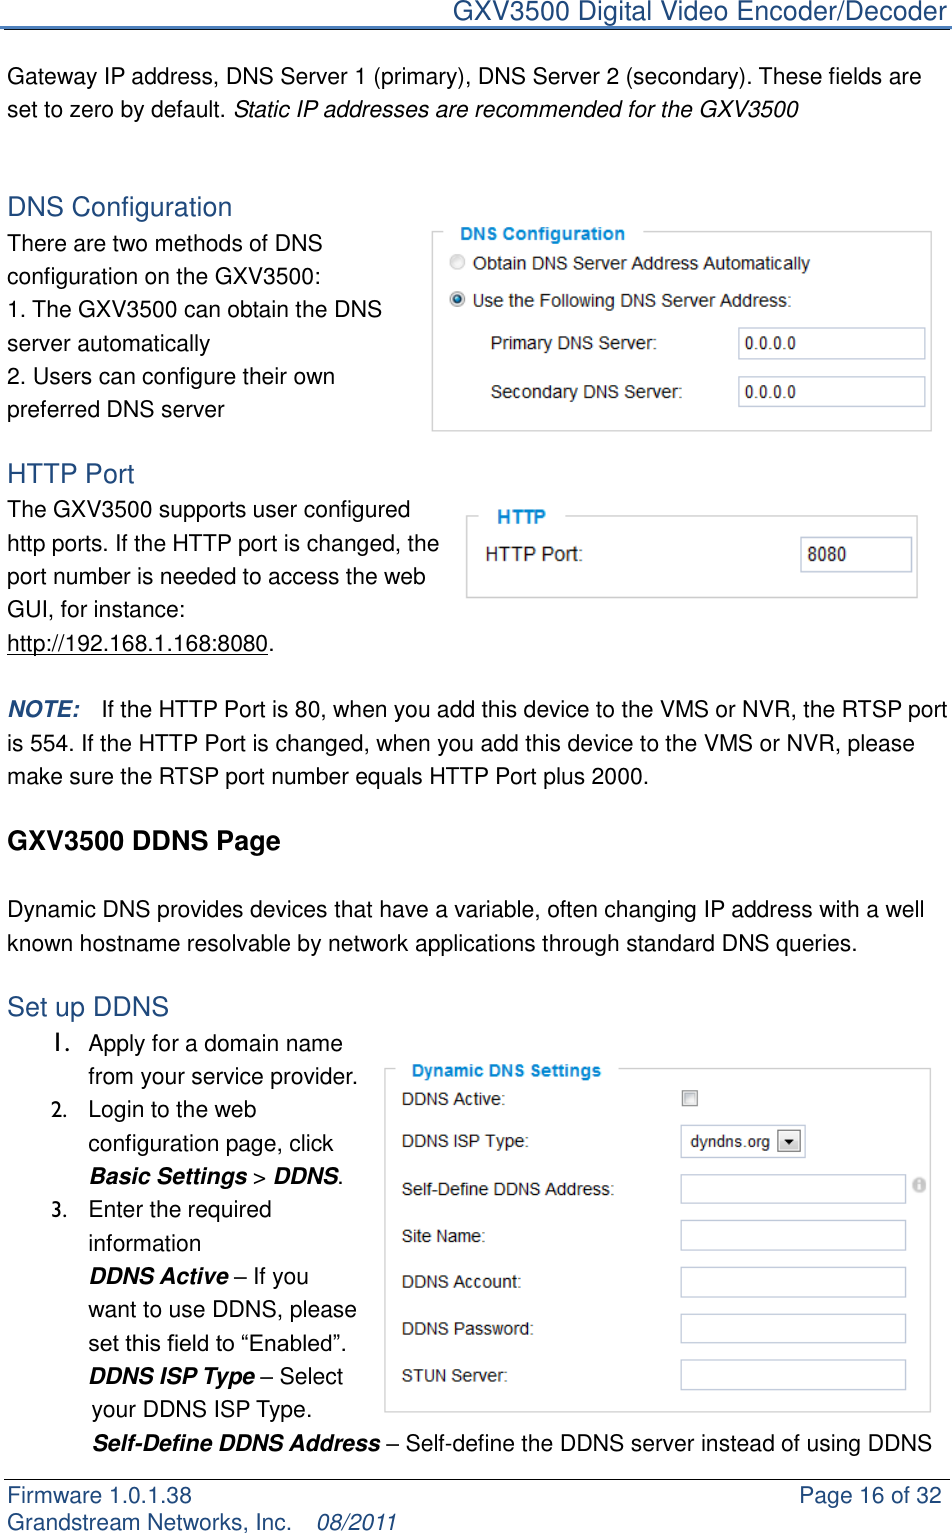     GXV3500 Digital Video Encoder/Decoder Firmware 1.0.1.38                                                     Page 16 of 32     Grandstream Networks, Inc.  08/2011  Gateway IP address, DNS Server 1 (primary), DNS Server 2 (secondary). These fields are set to zero by default. Static IP addresses are recommended for the GXV3500   DNS Configuration   There are two methods of DNS configuration on the GXV3500: 1. The GXV3500 can obtain the DNS server automatically 2. Users can configure their own preferred DNS server  HTTP Port   The GXV3500 supports user configured http ports. If the HTTP port is changed, the port number is needed to access the web GUI, for instance: http://192.168.1.168:8080.  NOTE:  If the HTTP Port is 80, when you add this device to the VMS or NVR, the RTSP port is 554. If the HTTP Port is changed, when you add this device to the VMS or NVR, please make sure the RTSP port number equals HTTP Port plus 2000.    GXV3500 DDNS Page  Dynamic DNS provides devices that have a variable, often changing IP address with a well known hostname resolvable by network applications through standard DNS queries.    Set up DDNS 1. Apply for a domain name from your service provider. 2.  Login to the web configuration page, click Basic Settings &gt; DDNS.     3.  Enter the required information   DDNS Active – If you want to use DDNS, please set this field to “Enabled”.        DDNS ISP Type – Select your DDNS ISP Type. Self-Define DDNS Address – Self-define the DDNS server instead of using DDNS 